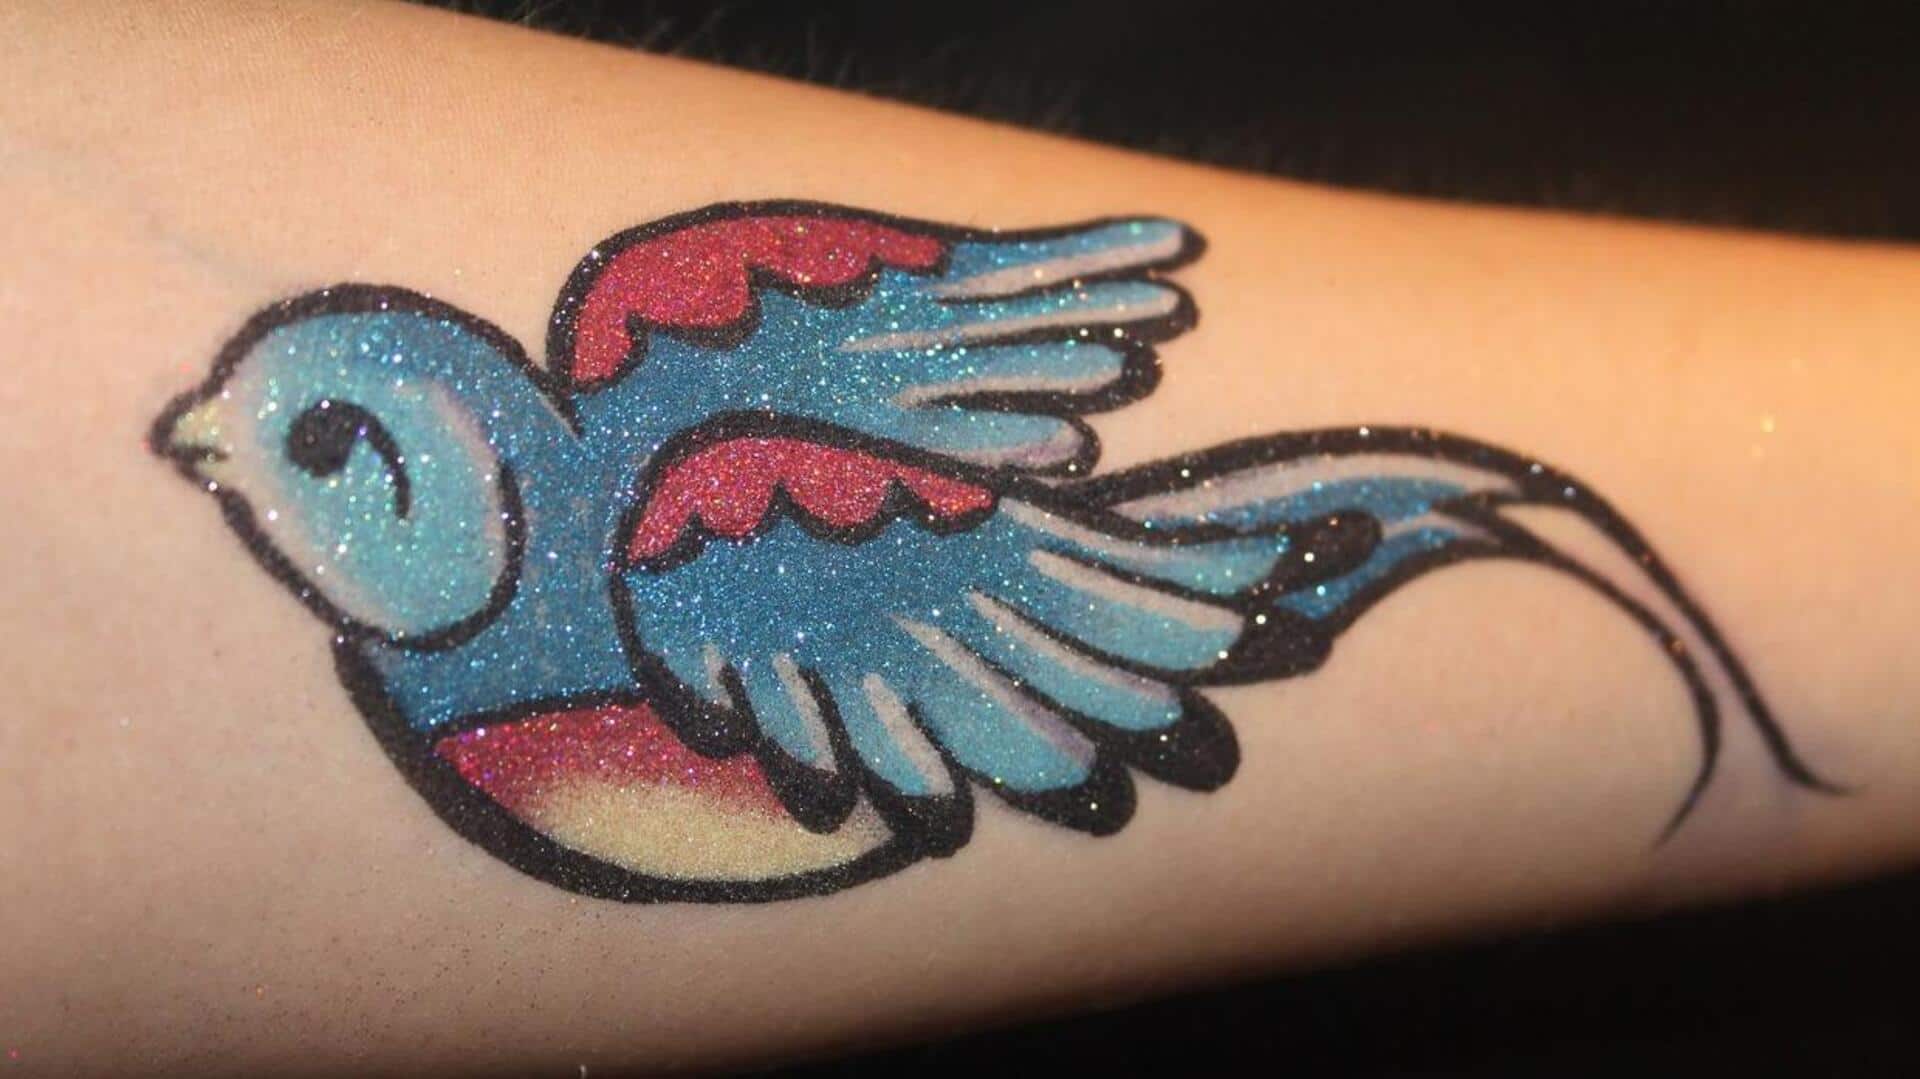 Glitter tattoos: Adding sparkle to your style